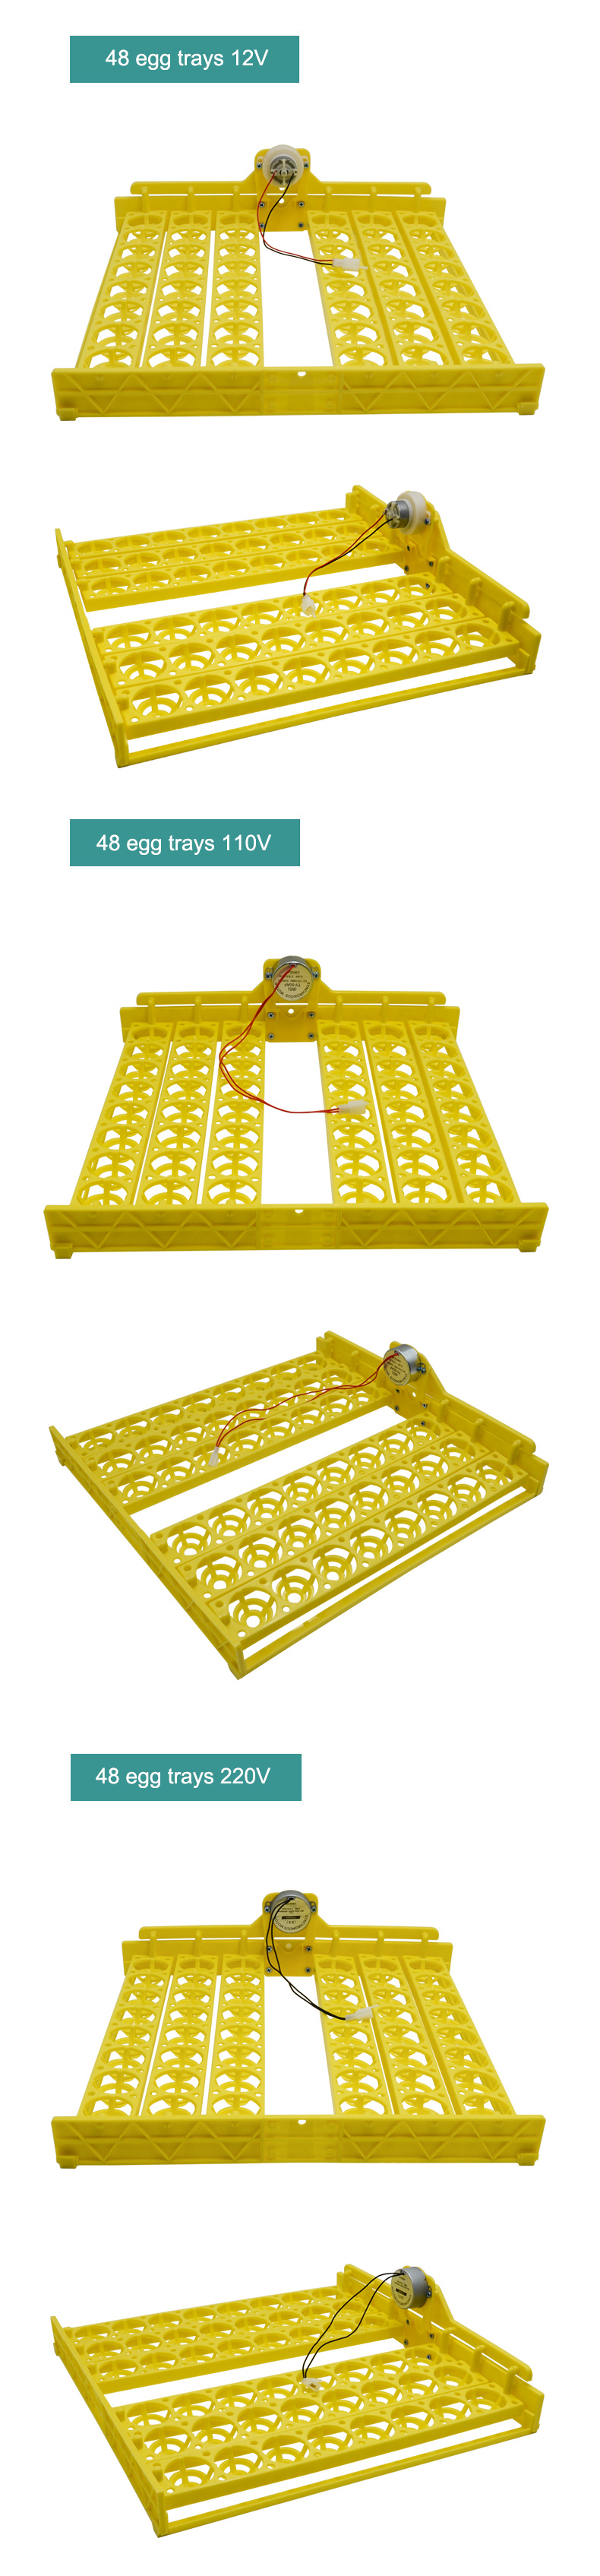 48 Egg Tray with Auto Turner Motor for Egg Incubator